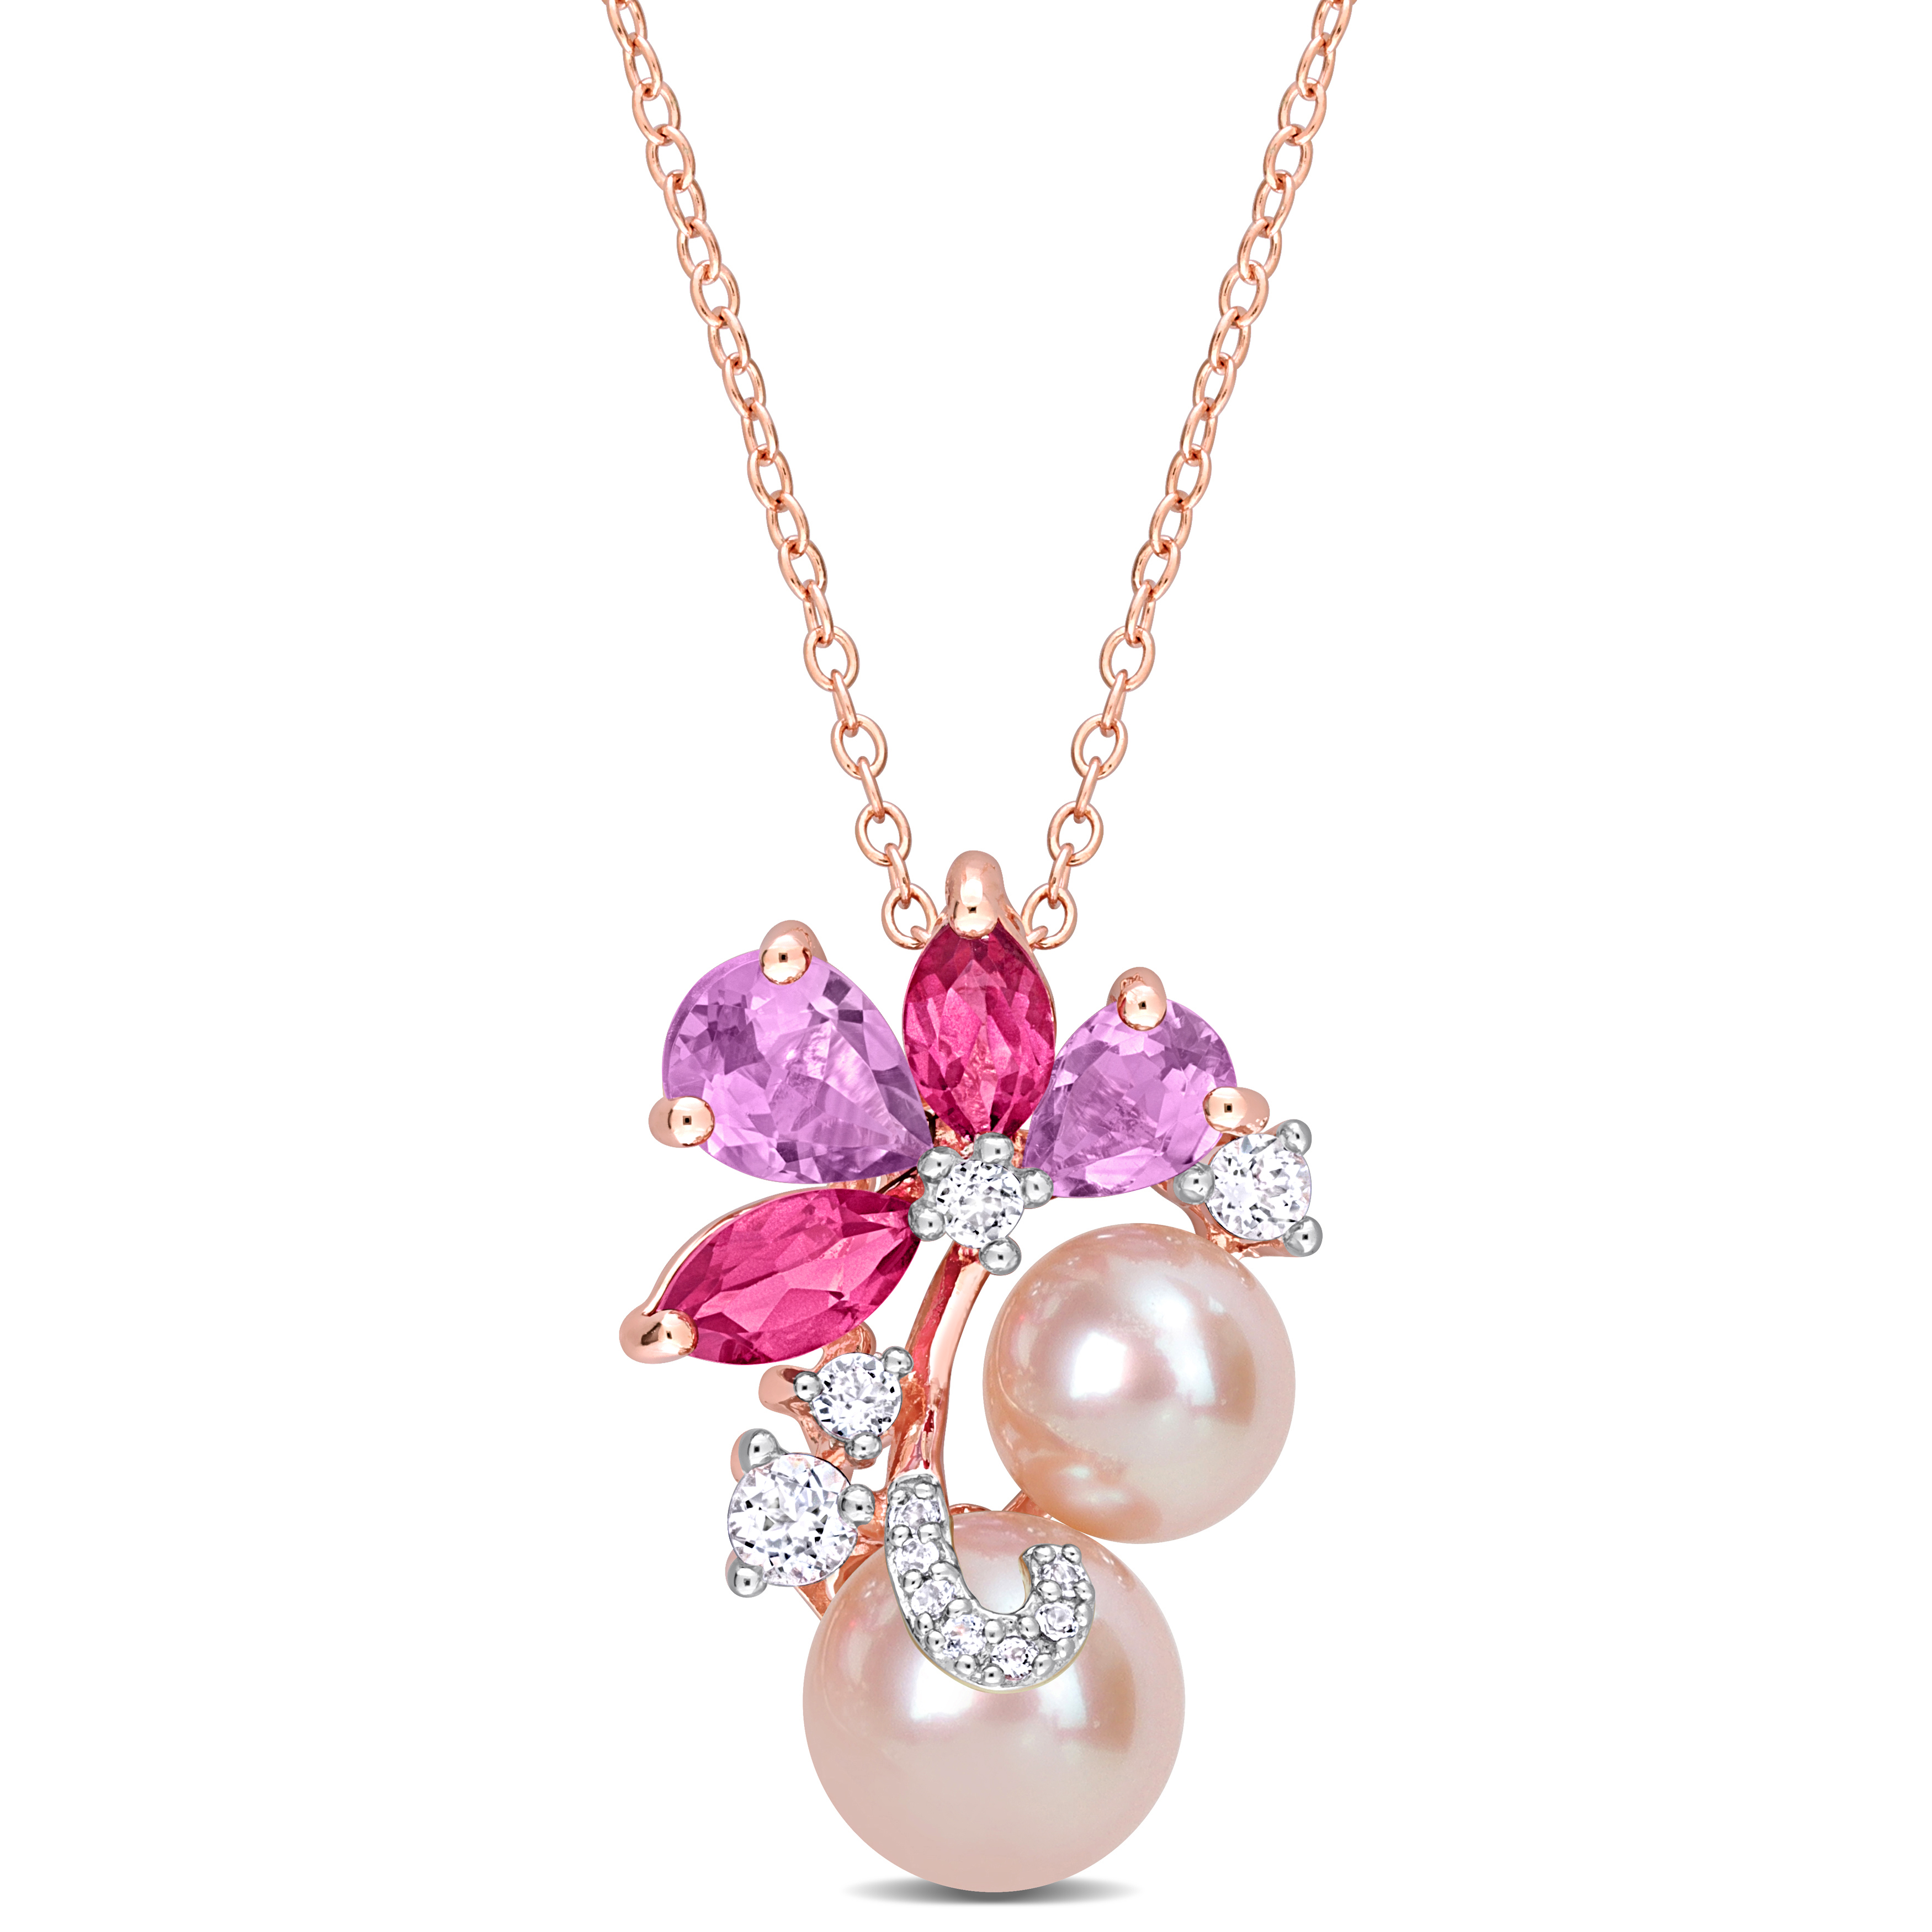 Pink Cultured Freshwater Pearl & 2 1/3 CT TGW Rose de France and Topaz Pendant with Chain in 18k Rose Plated Sterling Silver